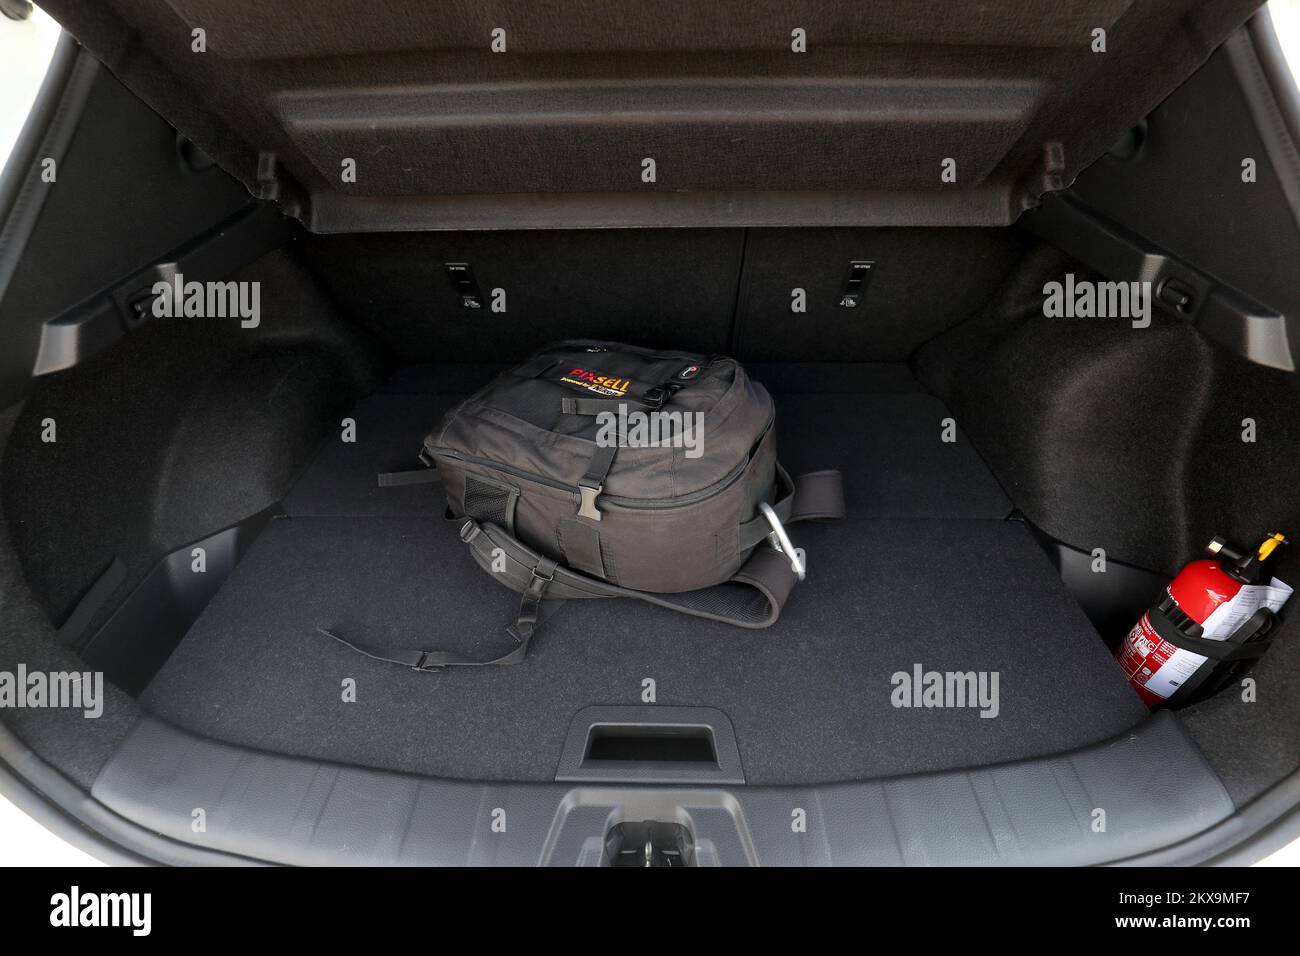 Nissan Qashqai dimensions, boot space and electrification